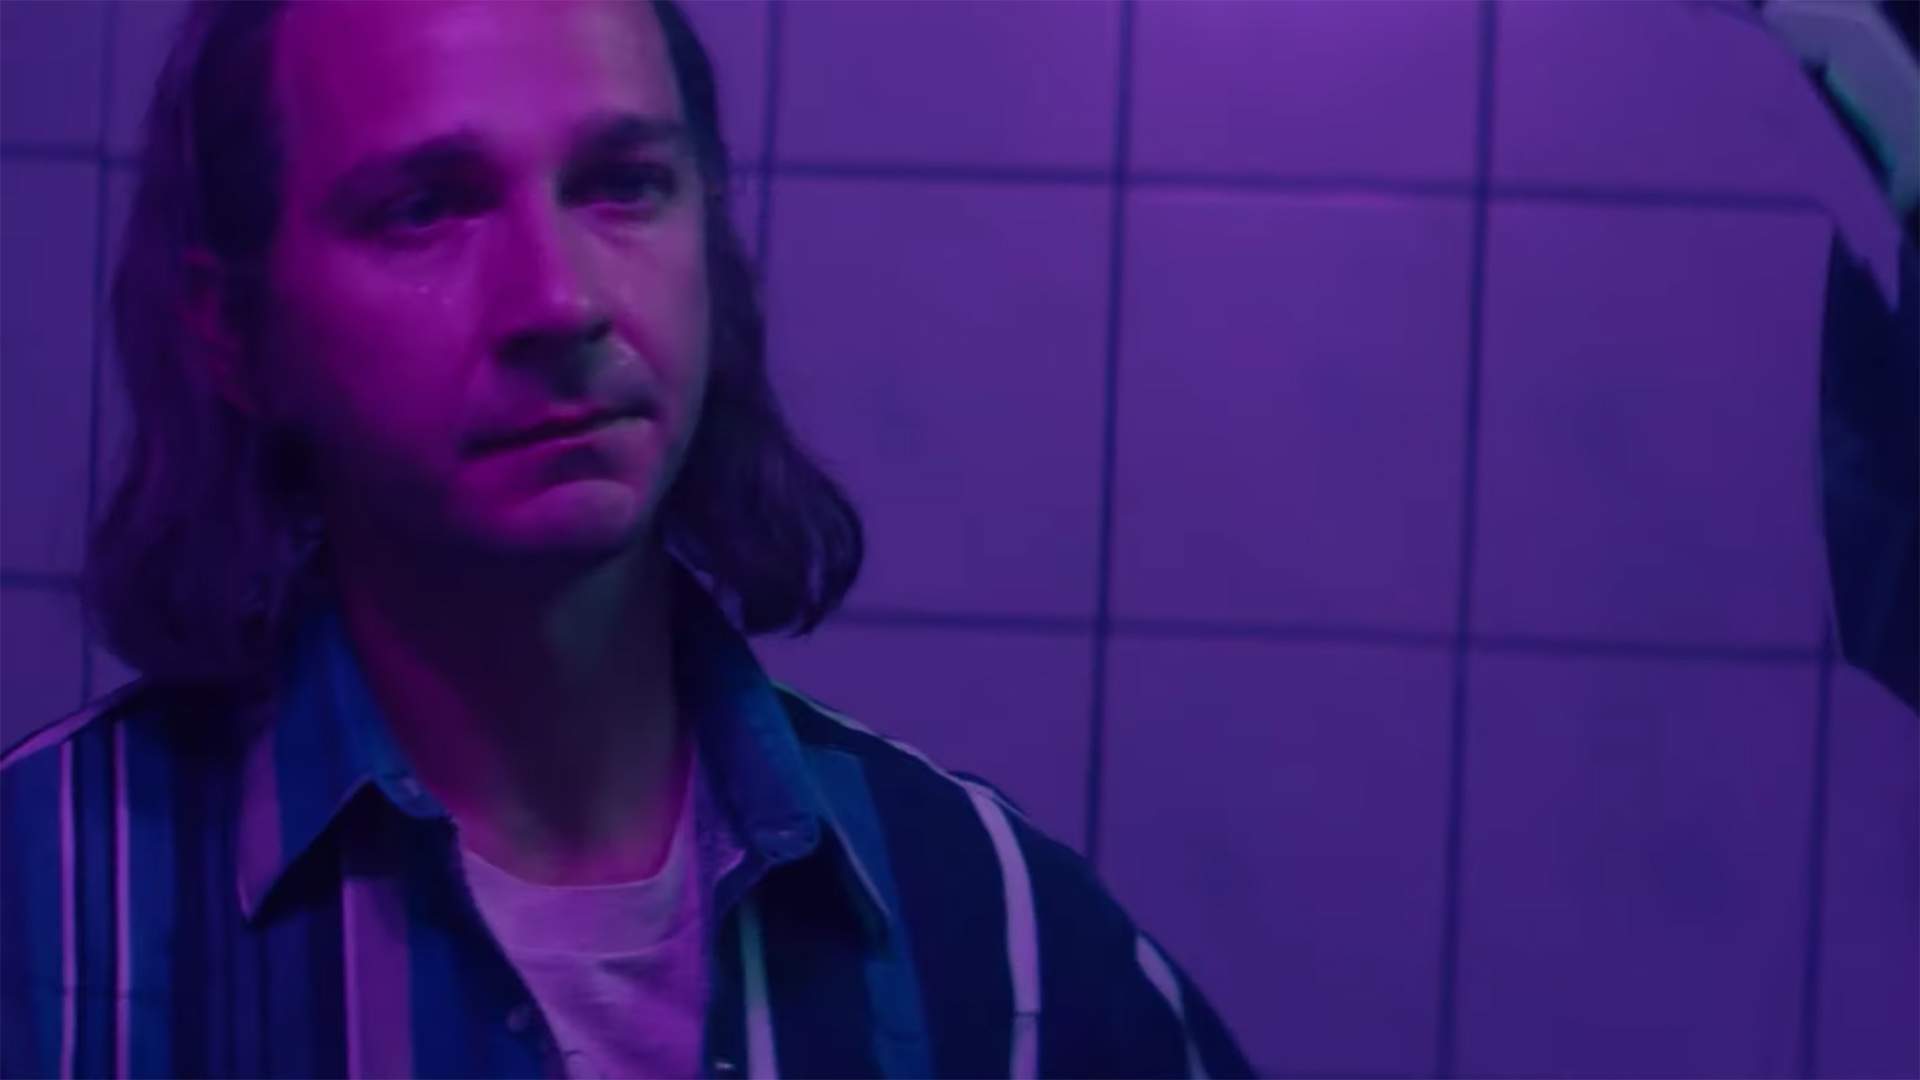 Shia LaBeouf Recreates His Child Star Past (and Plays His Own Dad) in the Trailer for 'Honey Boy'